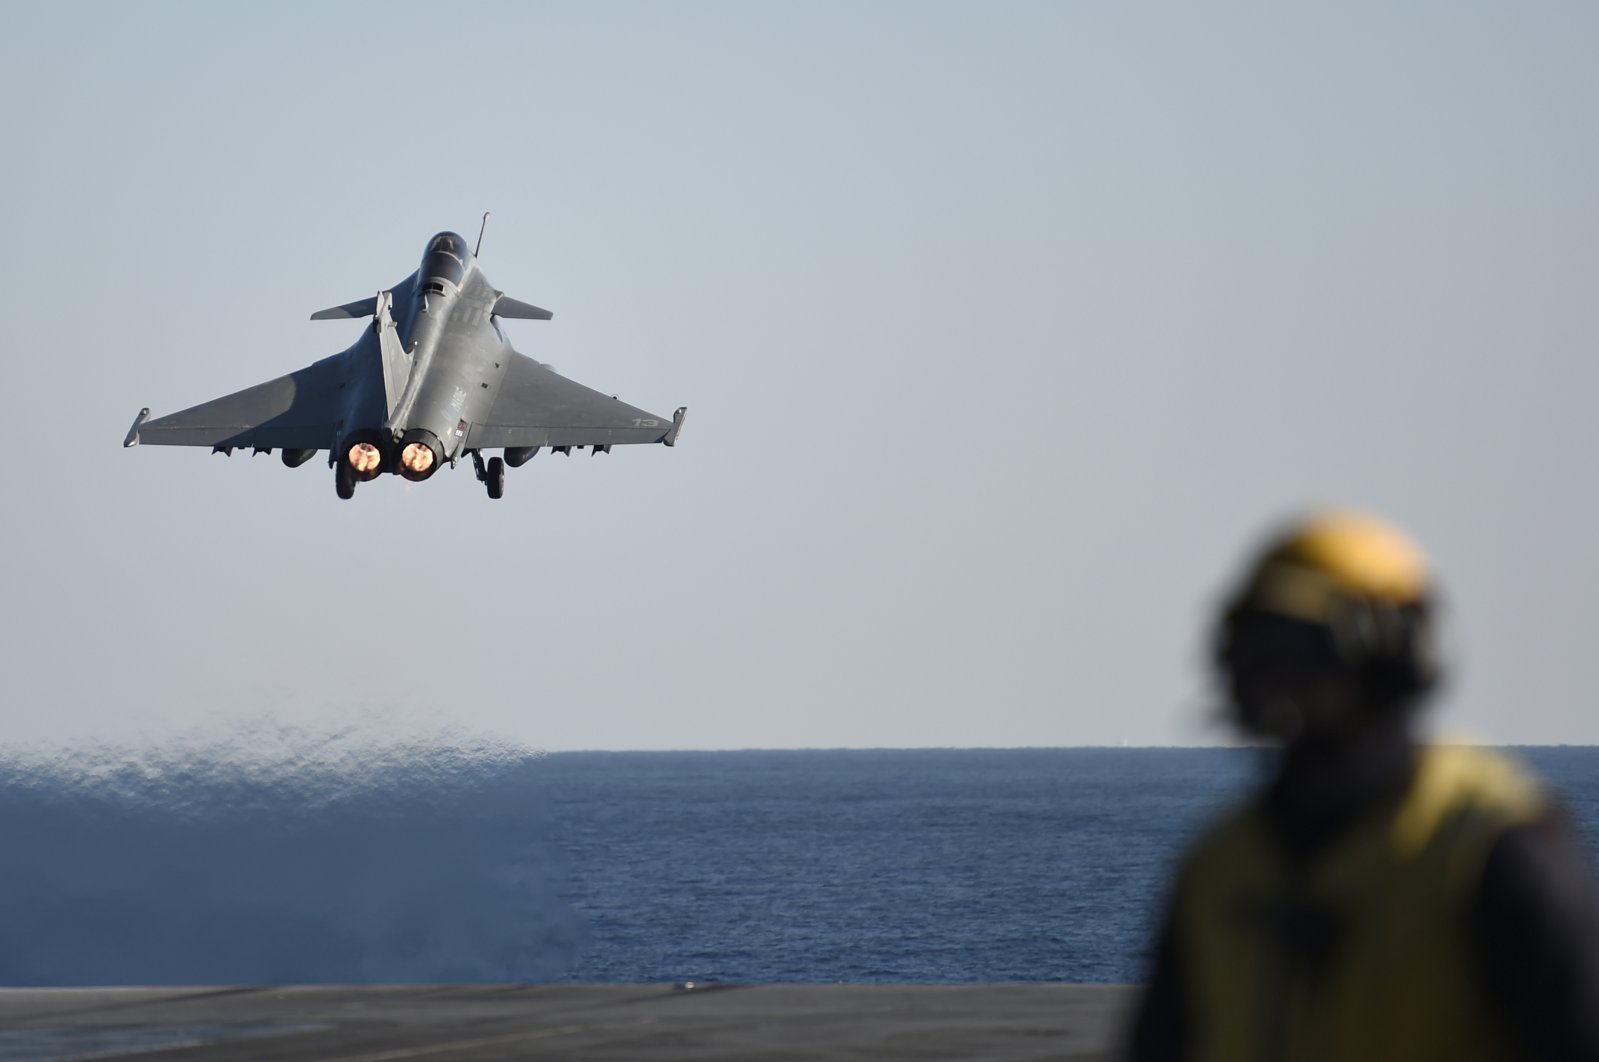 A French Rafale fighter jet takes off from France&#039;s aircraft carrier Charles-de-Gaulle, used in the U.S.-led operation against Daesh group in Syria and Iraq in the Eastern Mediterranean Sea, Dec. 9, 2016. (AP Photo)